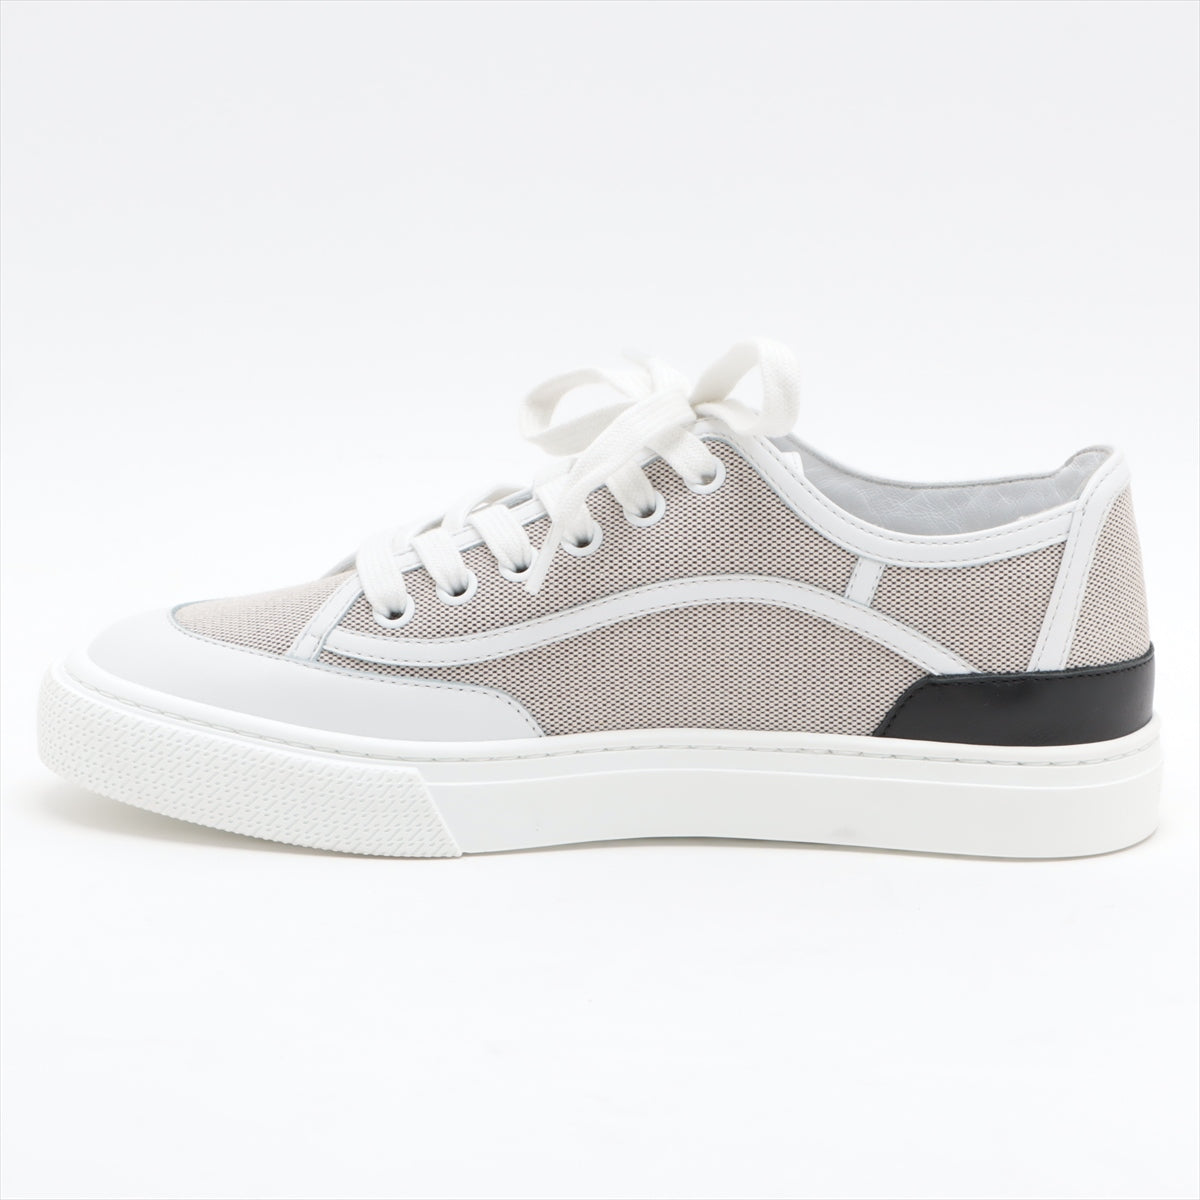 Hermès Canvas & leather Sneakers 36 Ladies' Beige x white get Toile H box sack Is there a replacement string